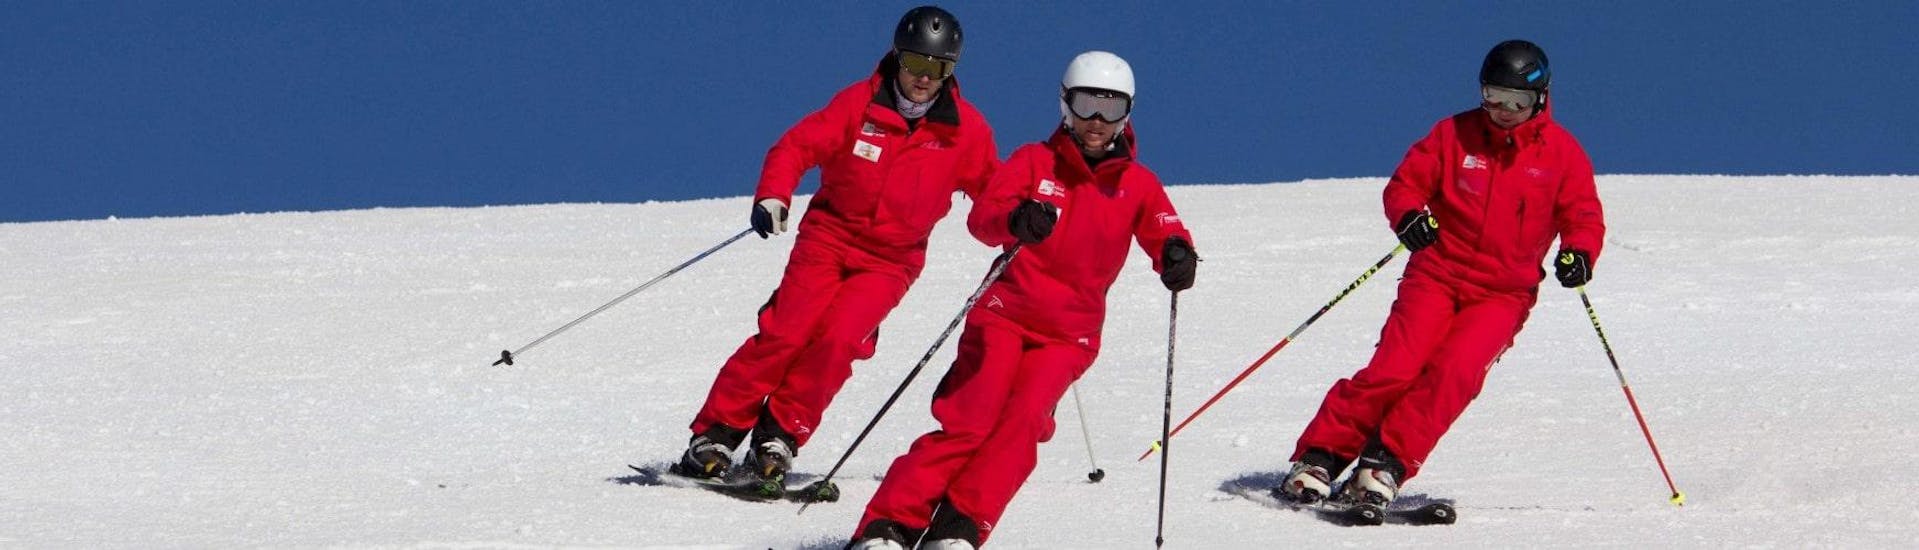 Ski Instructor Private for Adults - All Levels.